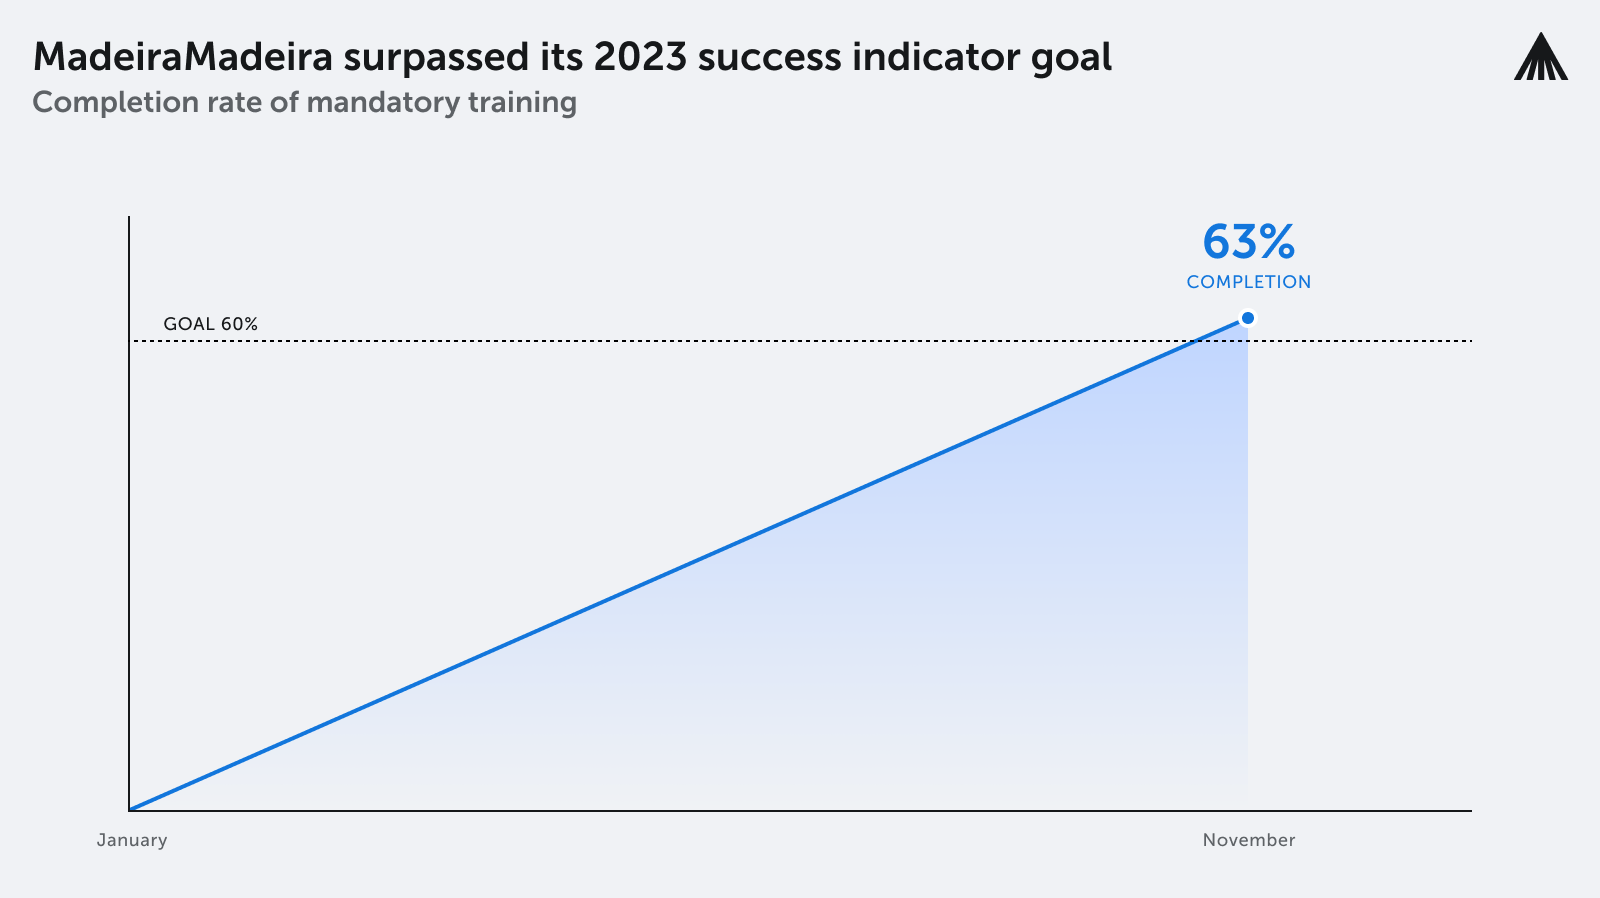 The image shows the results of Madeira Madeira case study and how they surpassed the goal